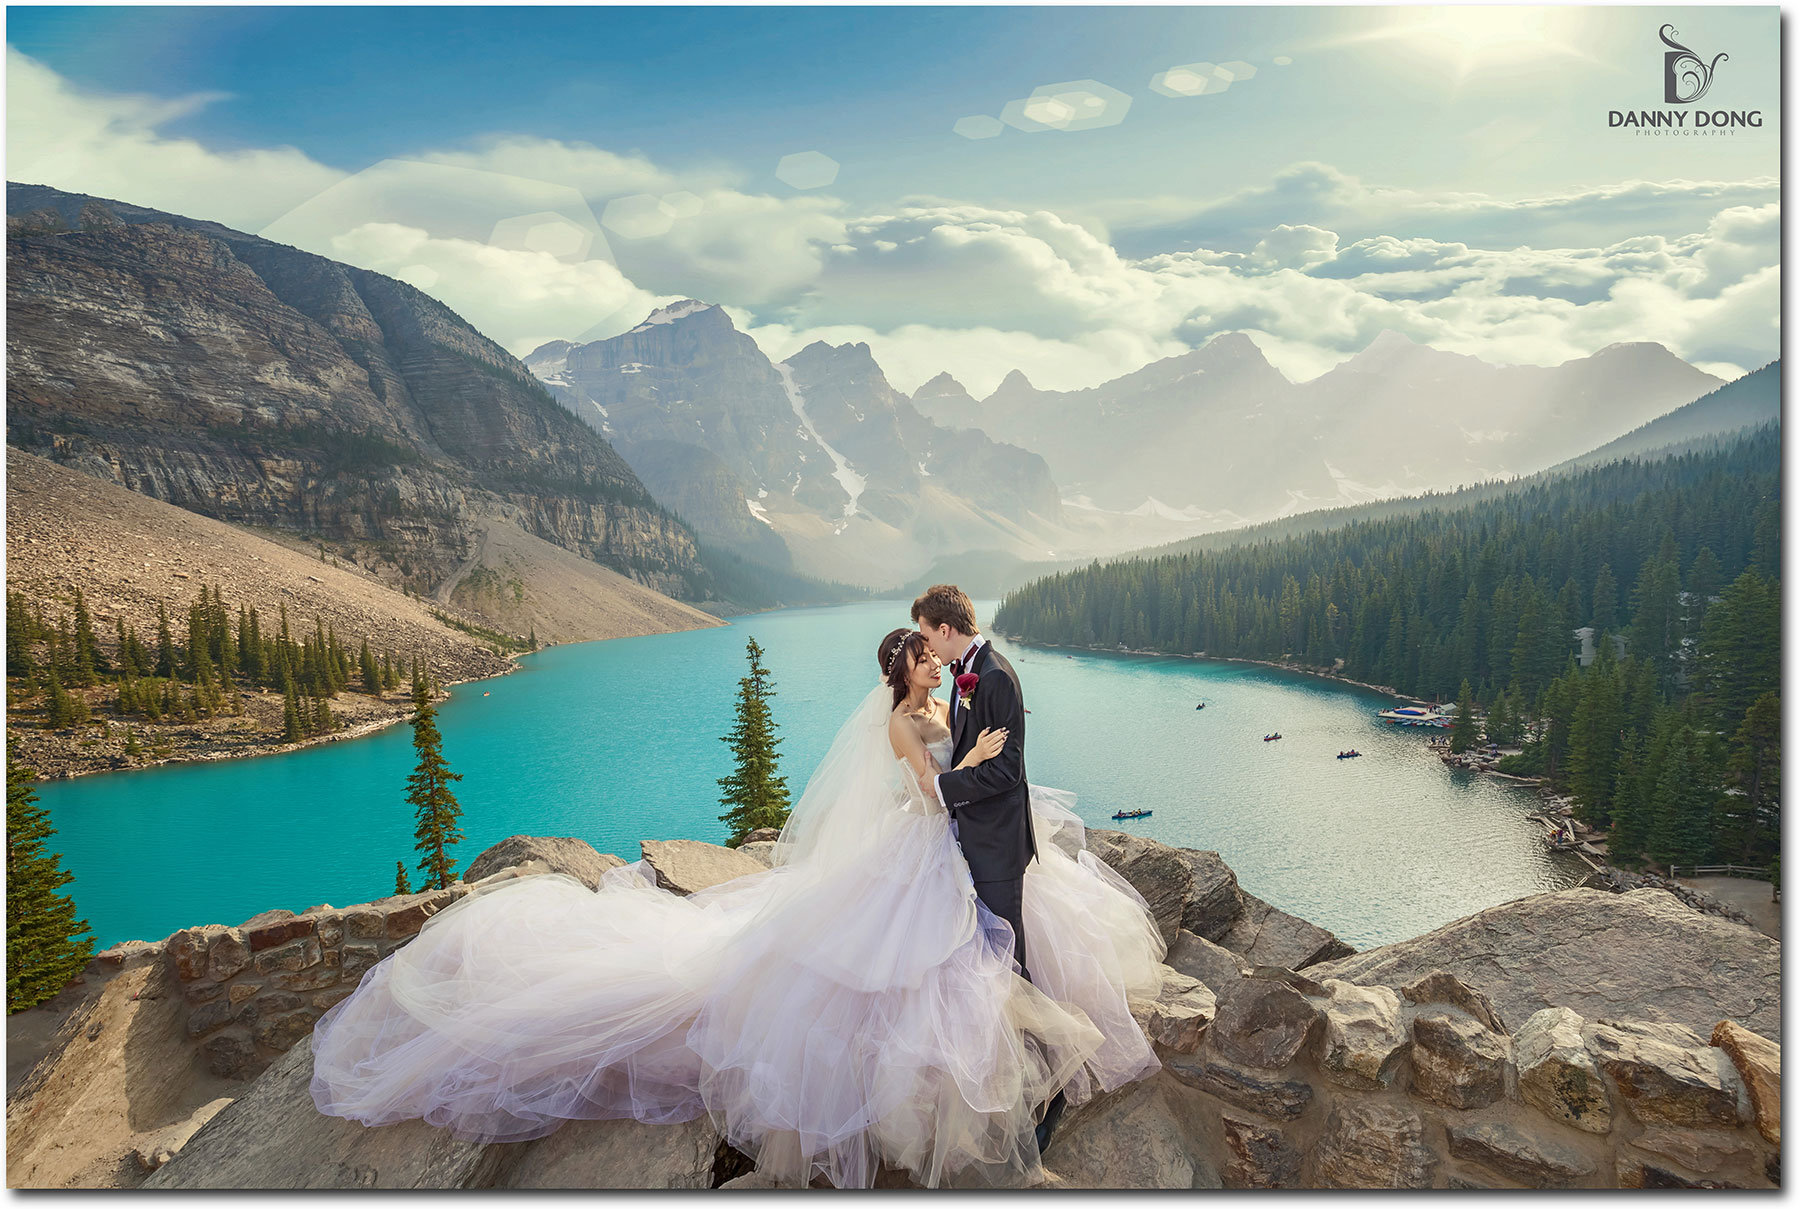 Fairmont Chateau Lake Louise Wedding Sherry Frank Banff Canada Danny Dong Photography